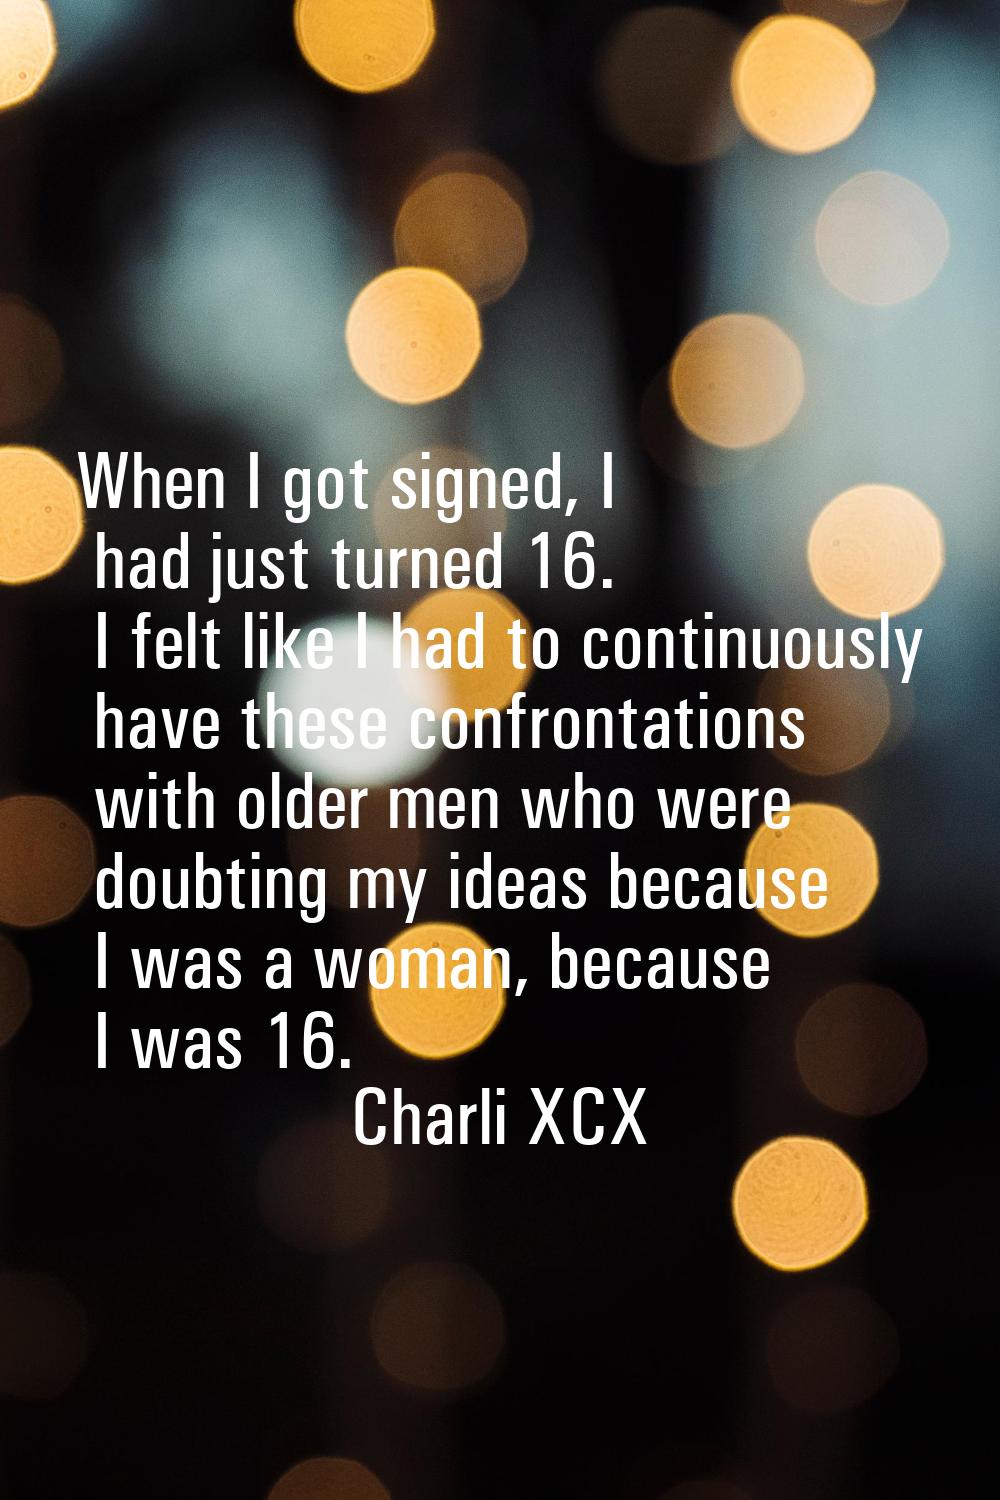 When I got signed, I had just turned 16. I felt like I had to continuously have these confrontation